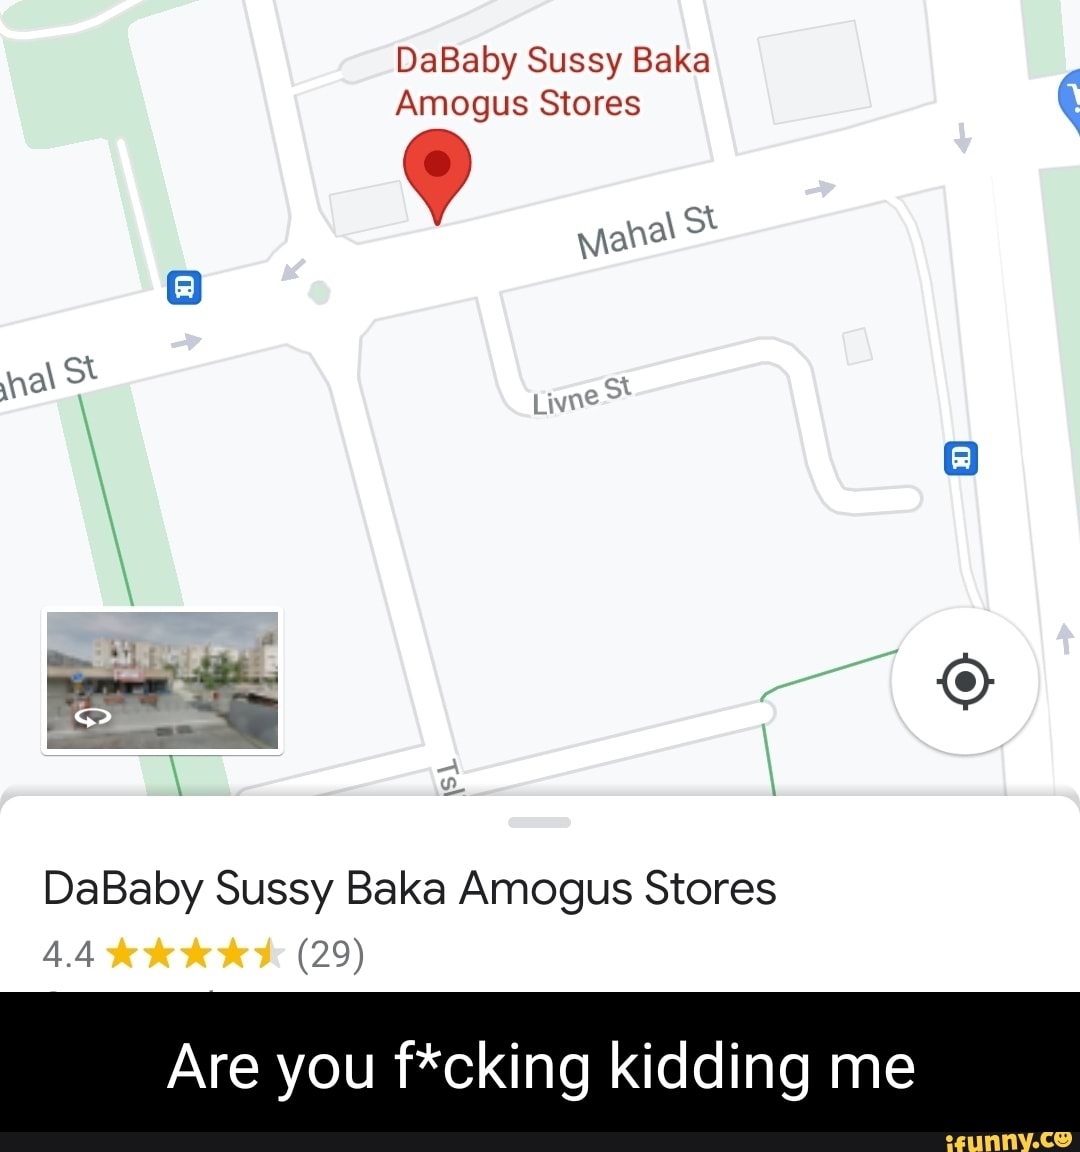 DaBaby Sussy Amogus School – We welcome even the sussiest of bakas!